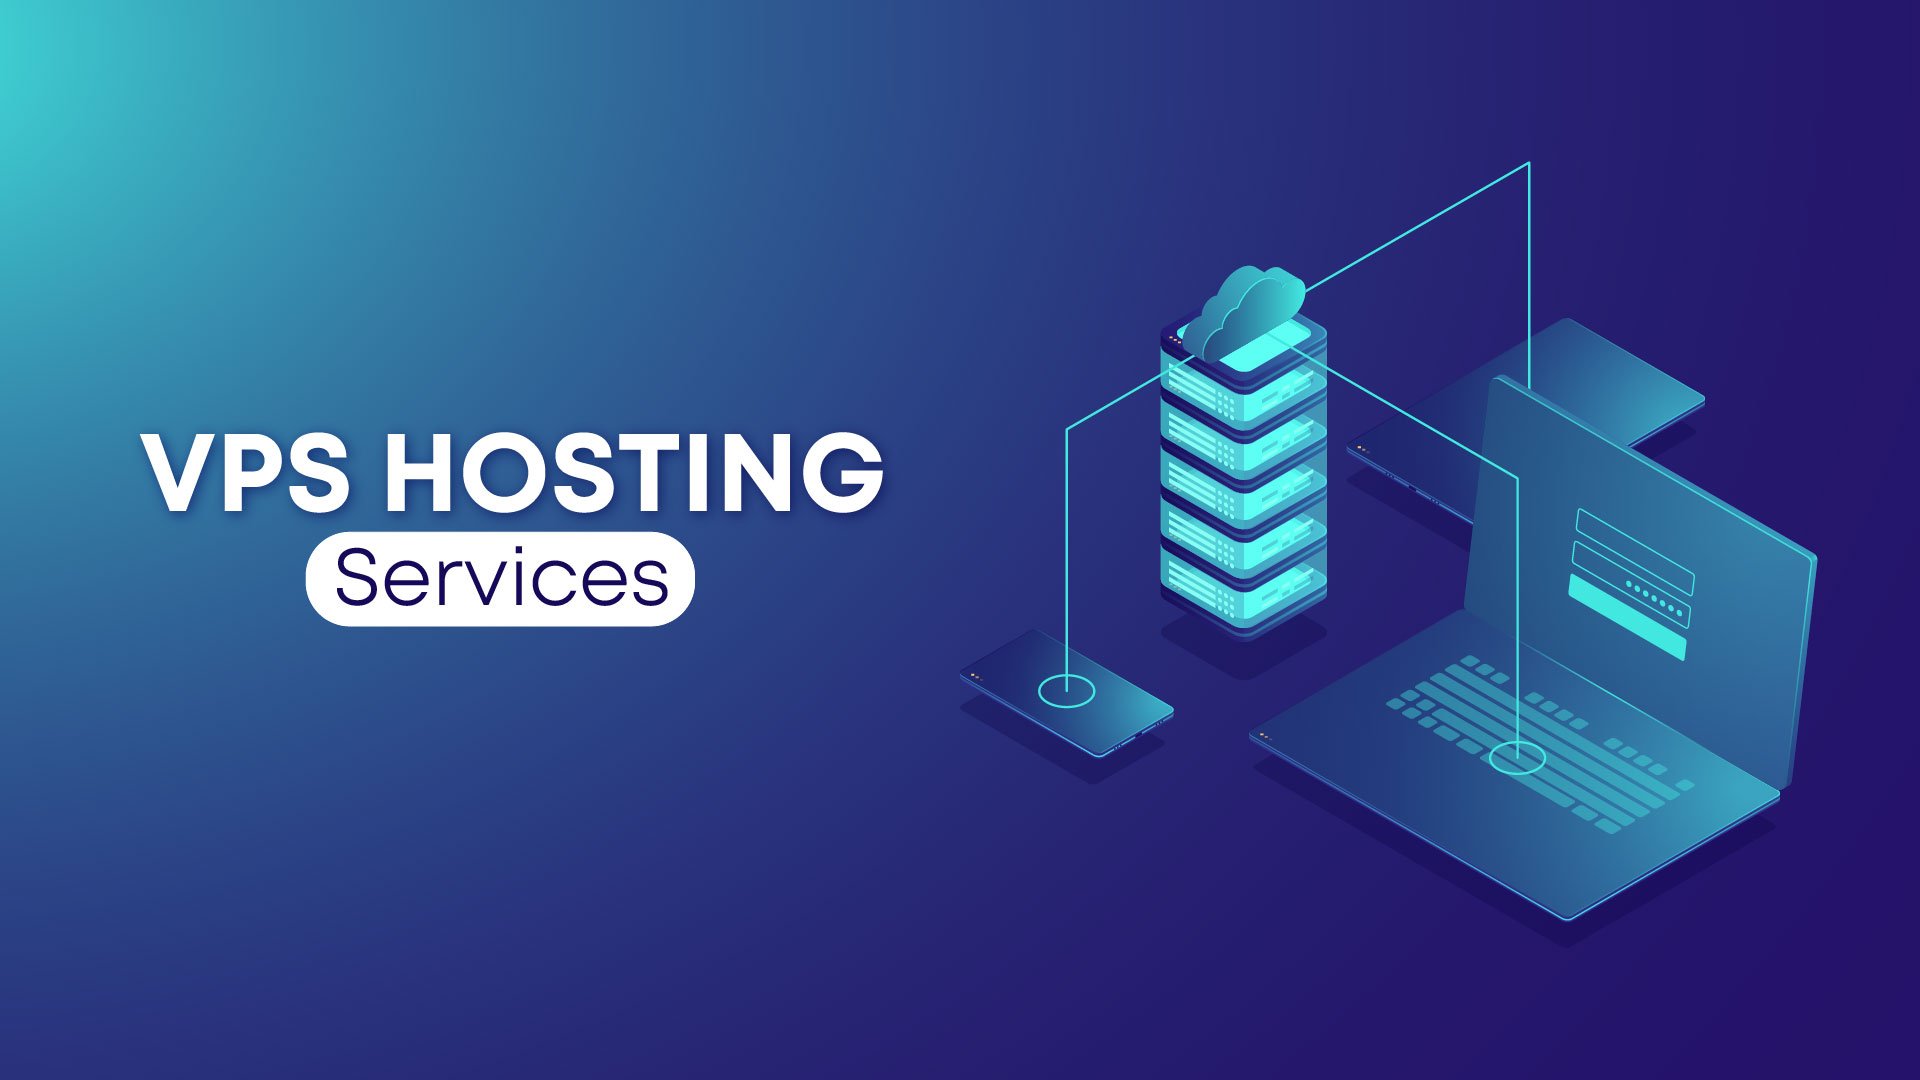 Powerful VPS Hosting Built for Growth of Business